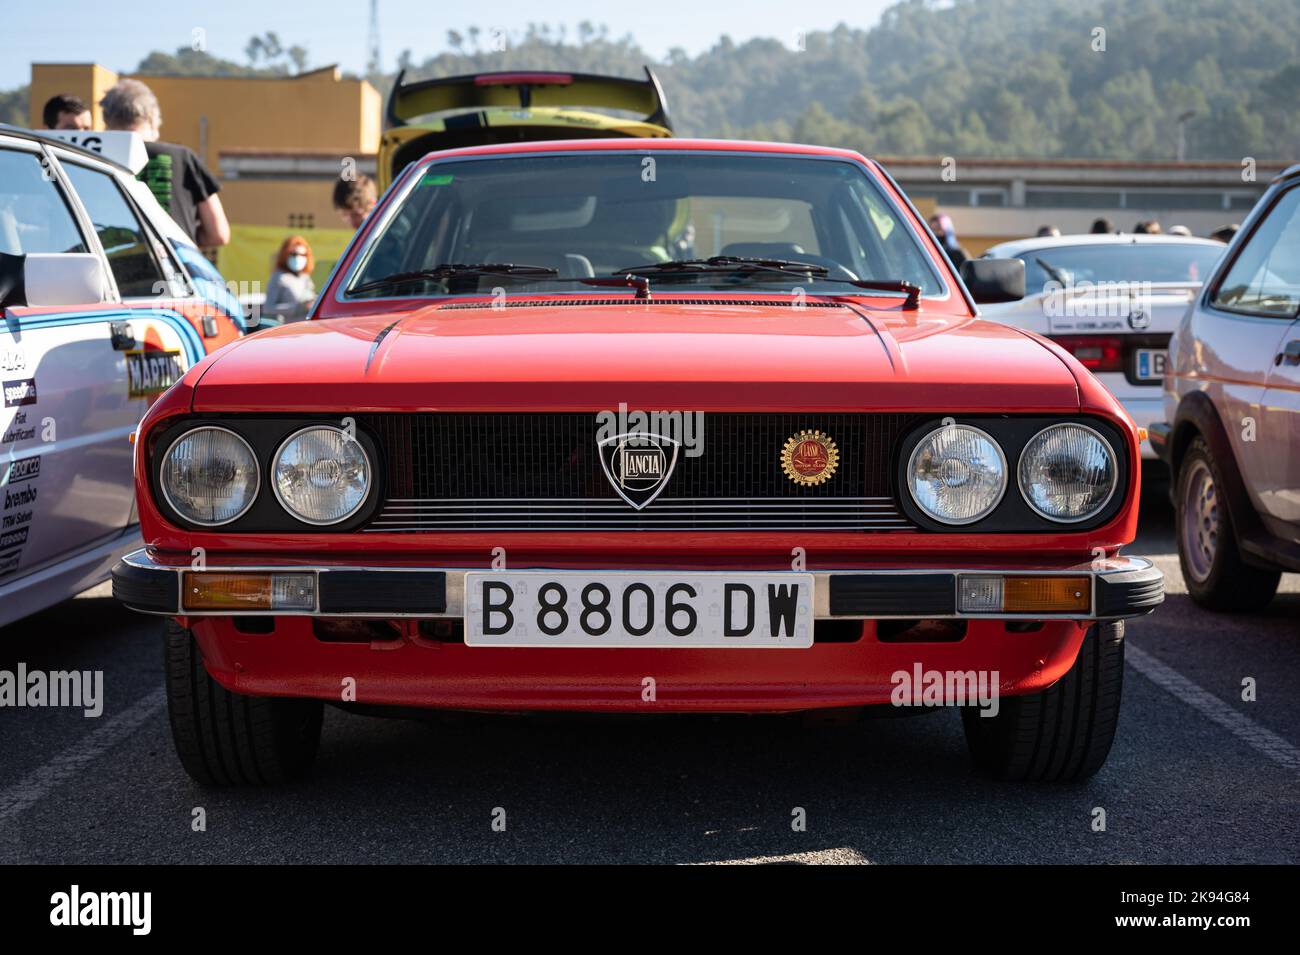 An old red Lancia Beta Coupe parked outside Stock Photo